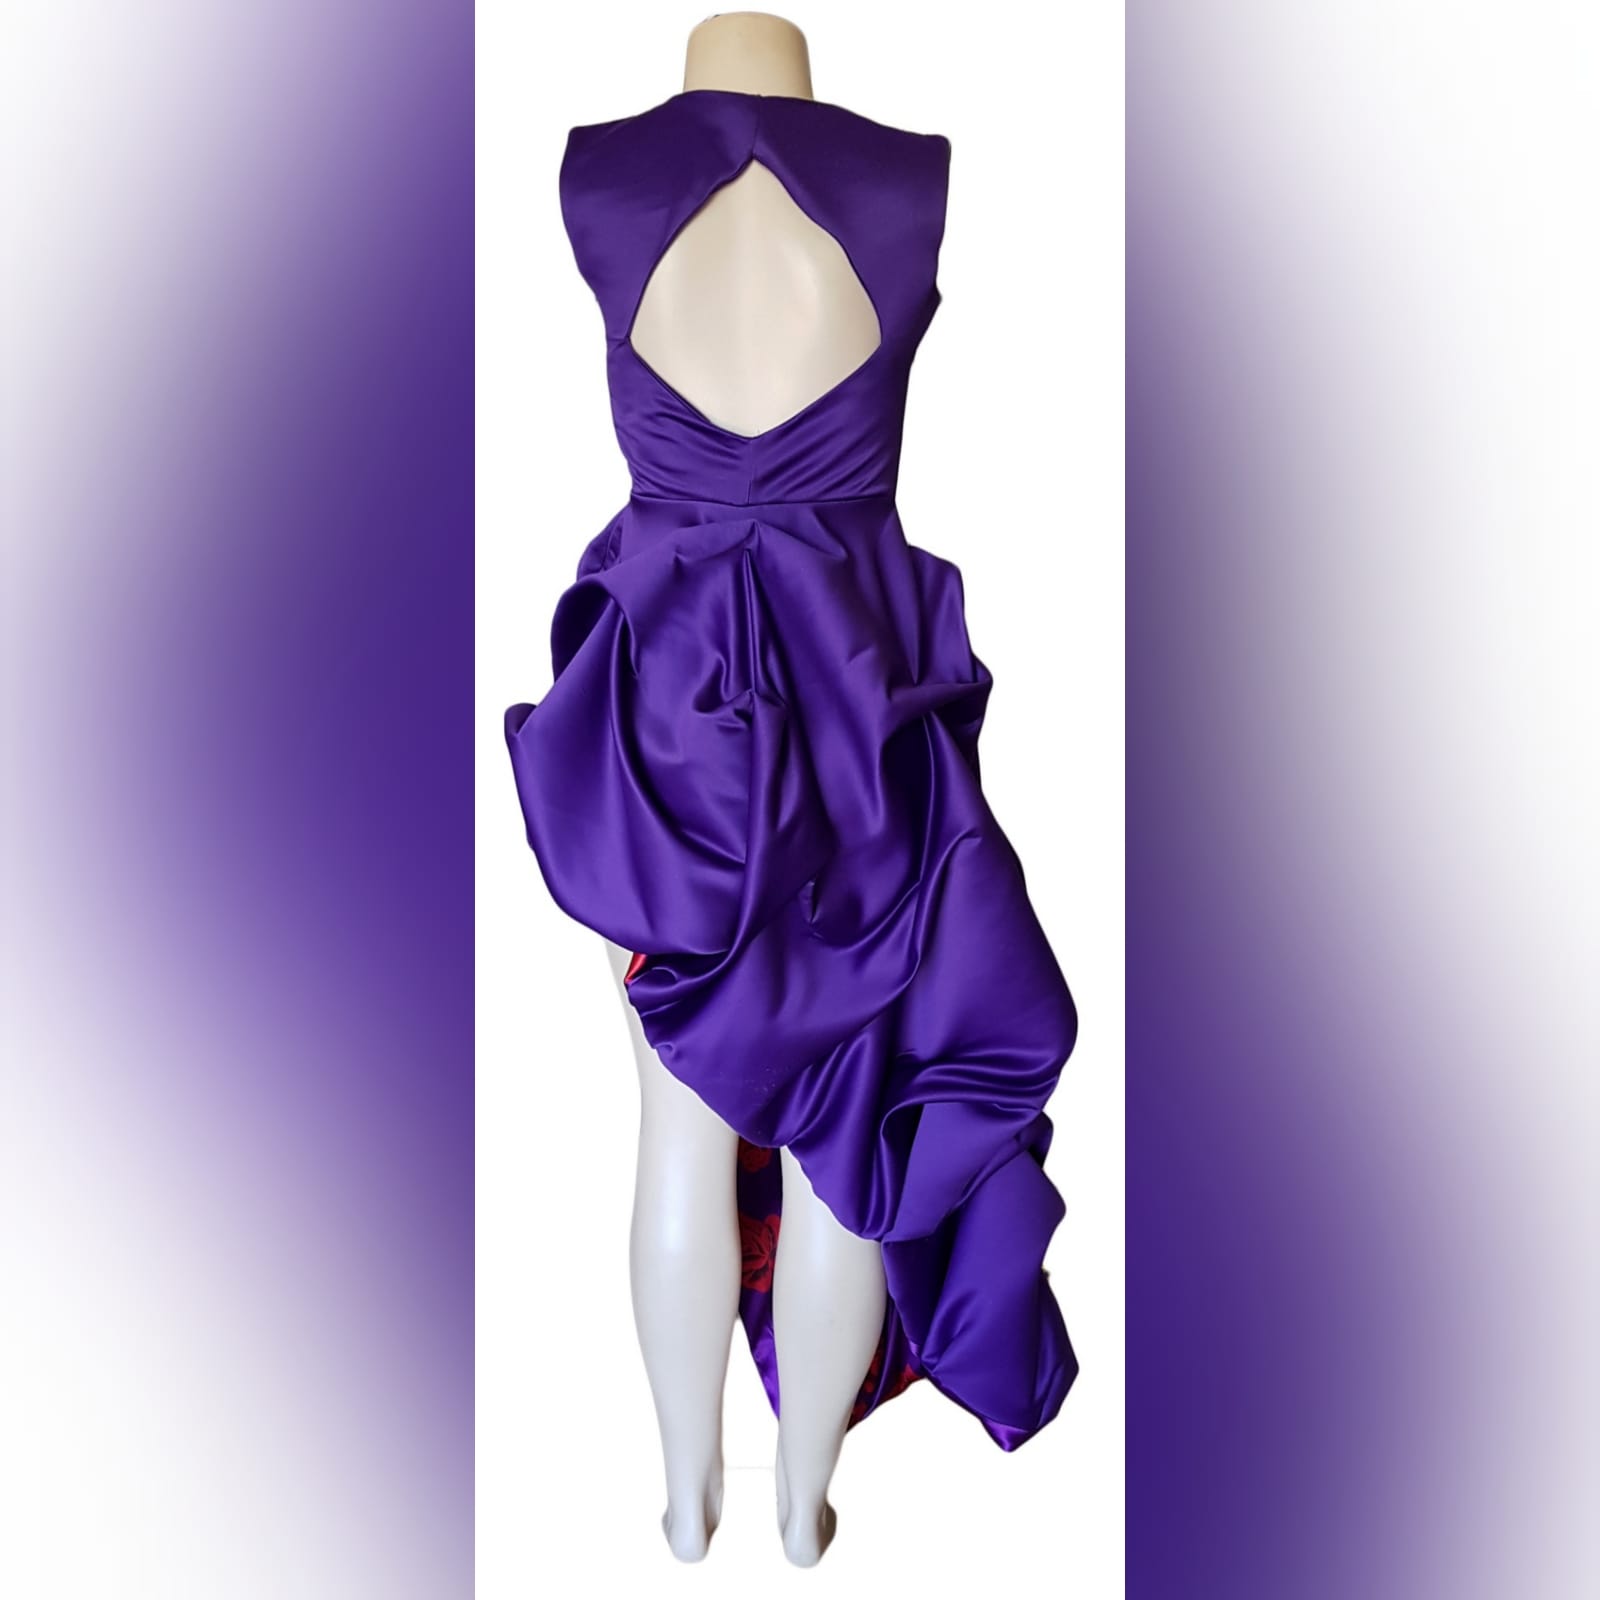 Purple and violet side high low prom dress 4 purple and violet side high low prom dress with a teardrop neckline and a diamond-shaped open back. With pull-ups lined with violet and red roses. Rose bust details.